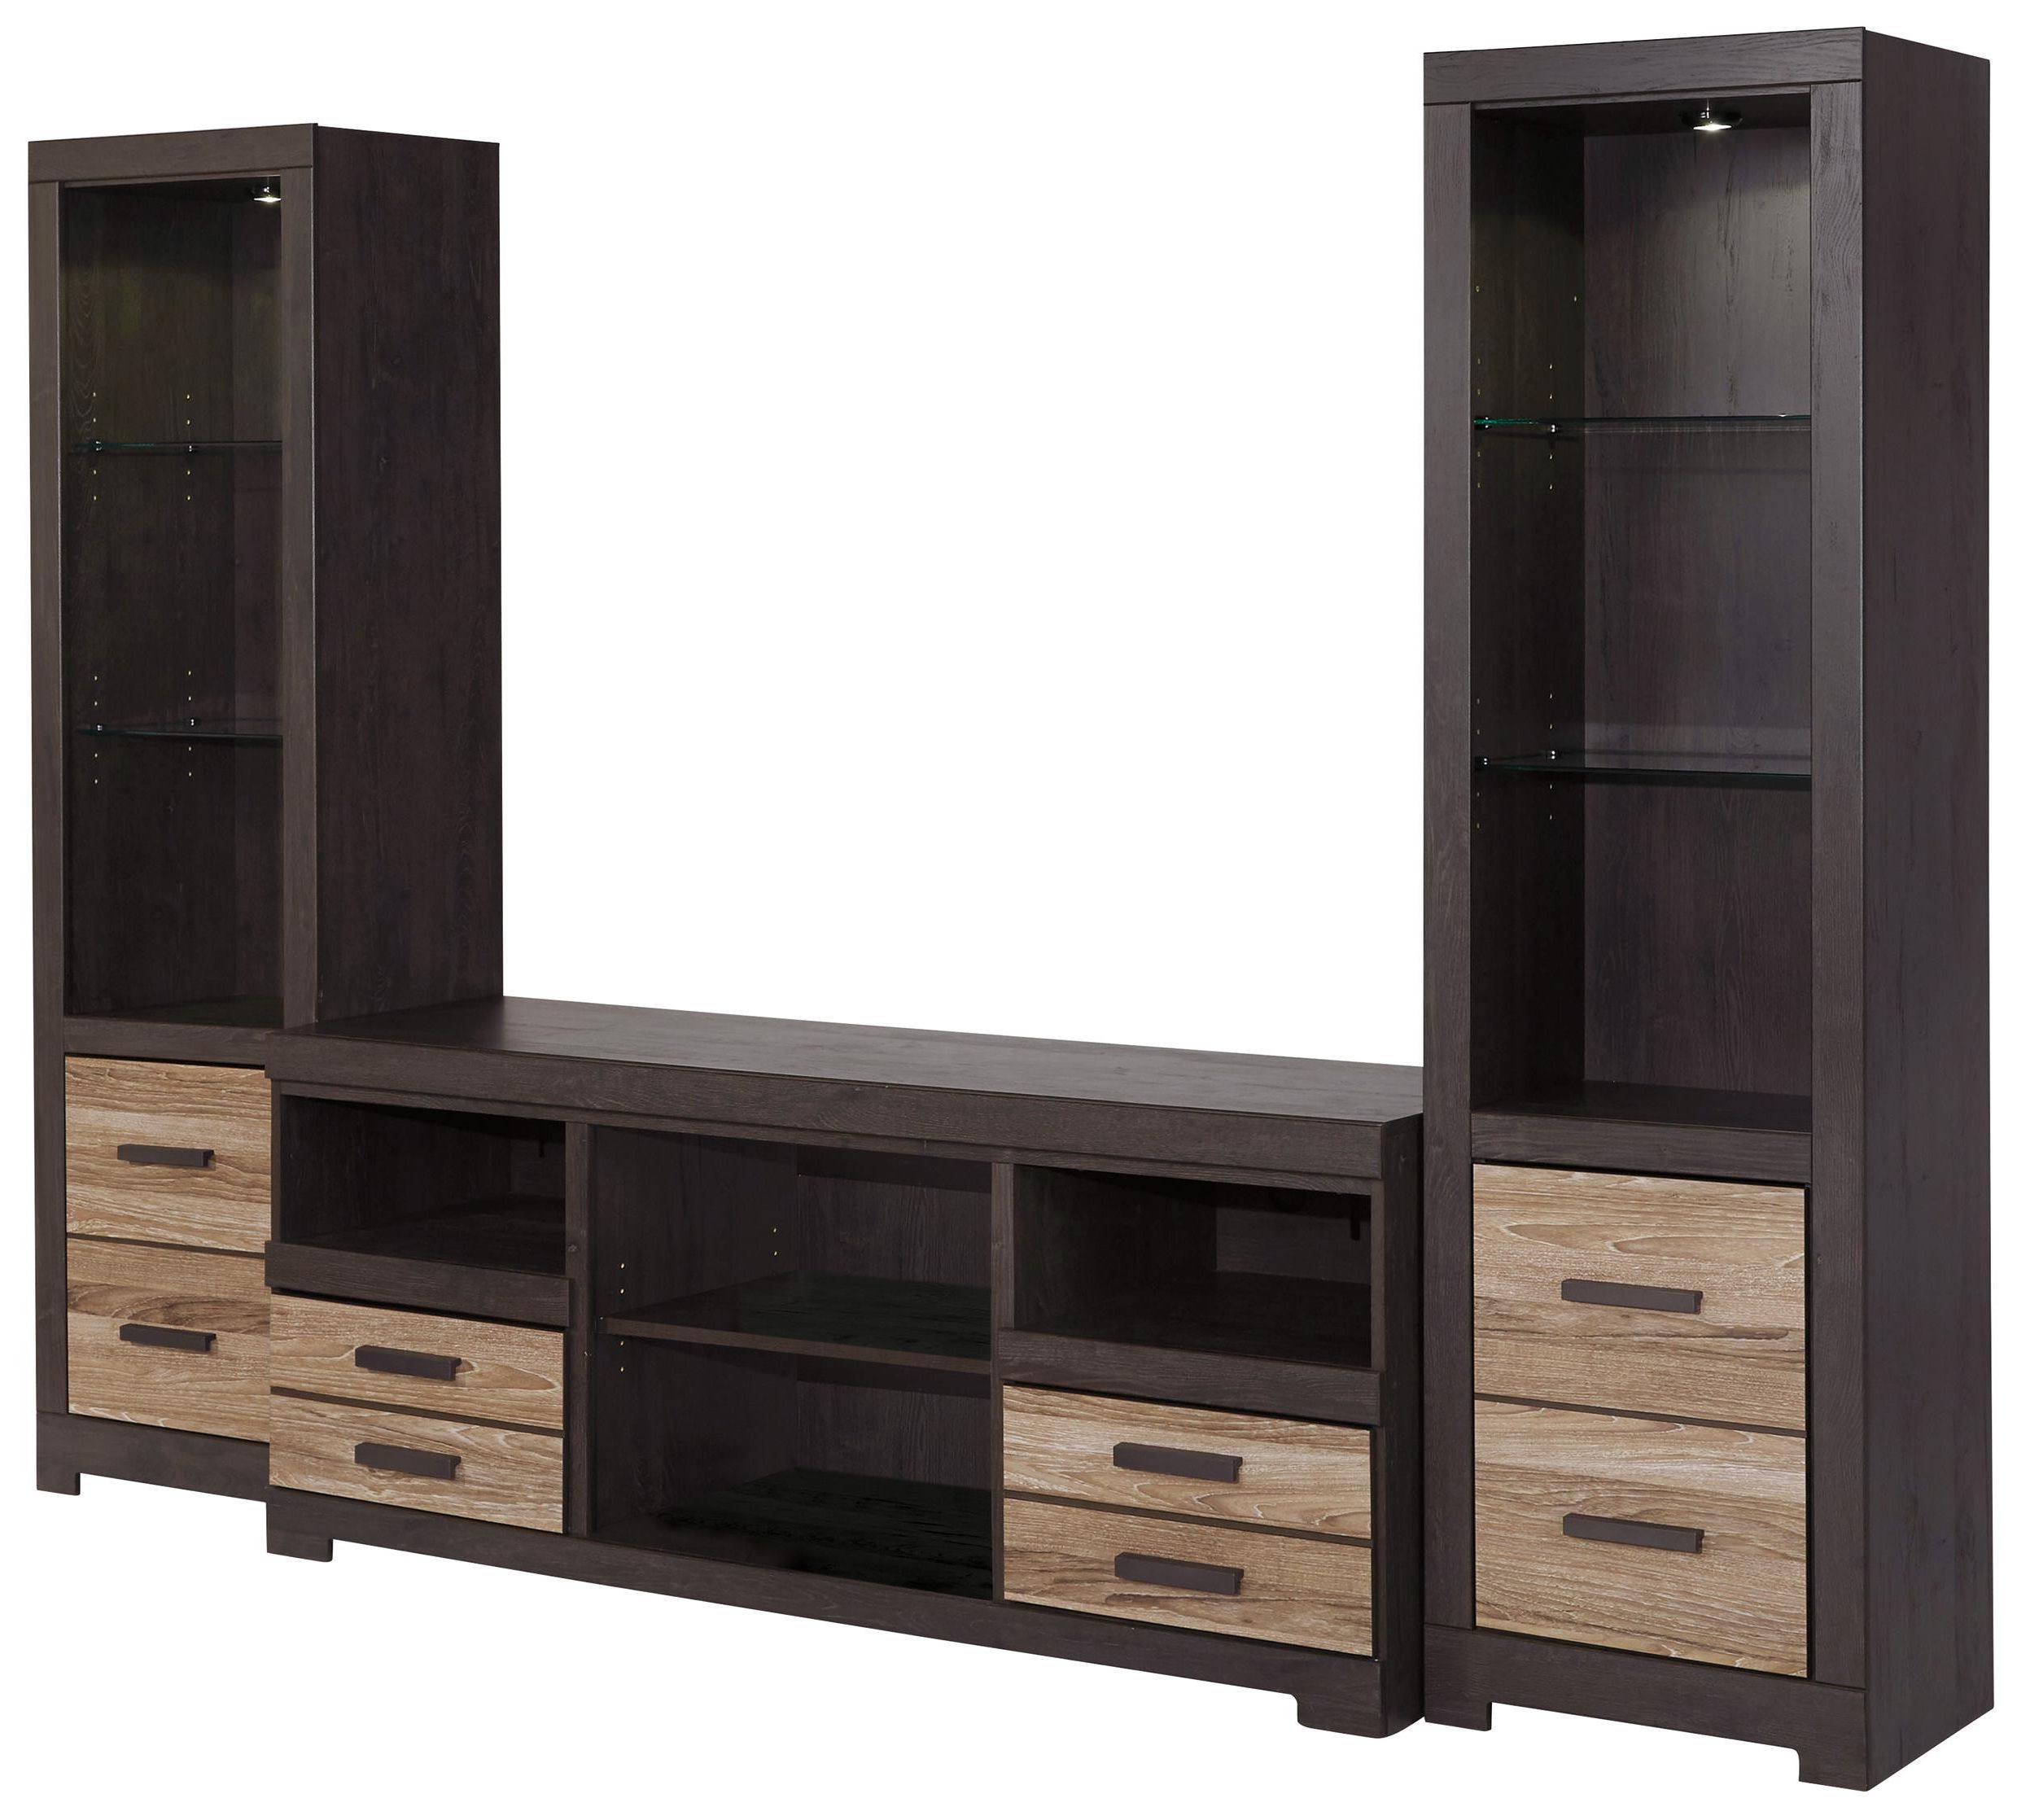 Large Tv Stand & 2 Tall Pierssignature Design Intended For Lancaster Large Tv Stands (Gallery 20 of 20)